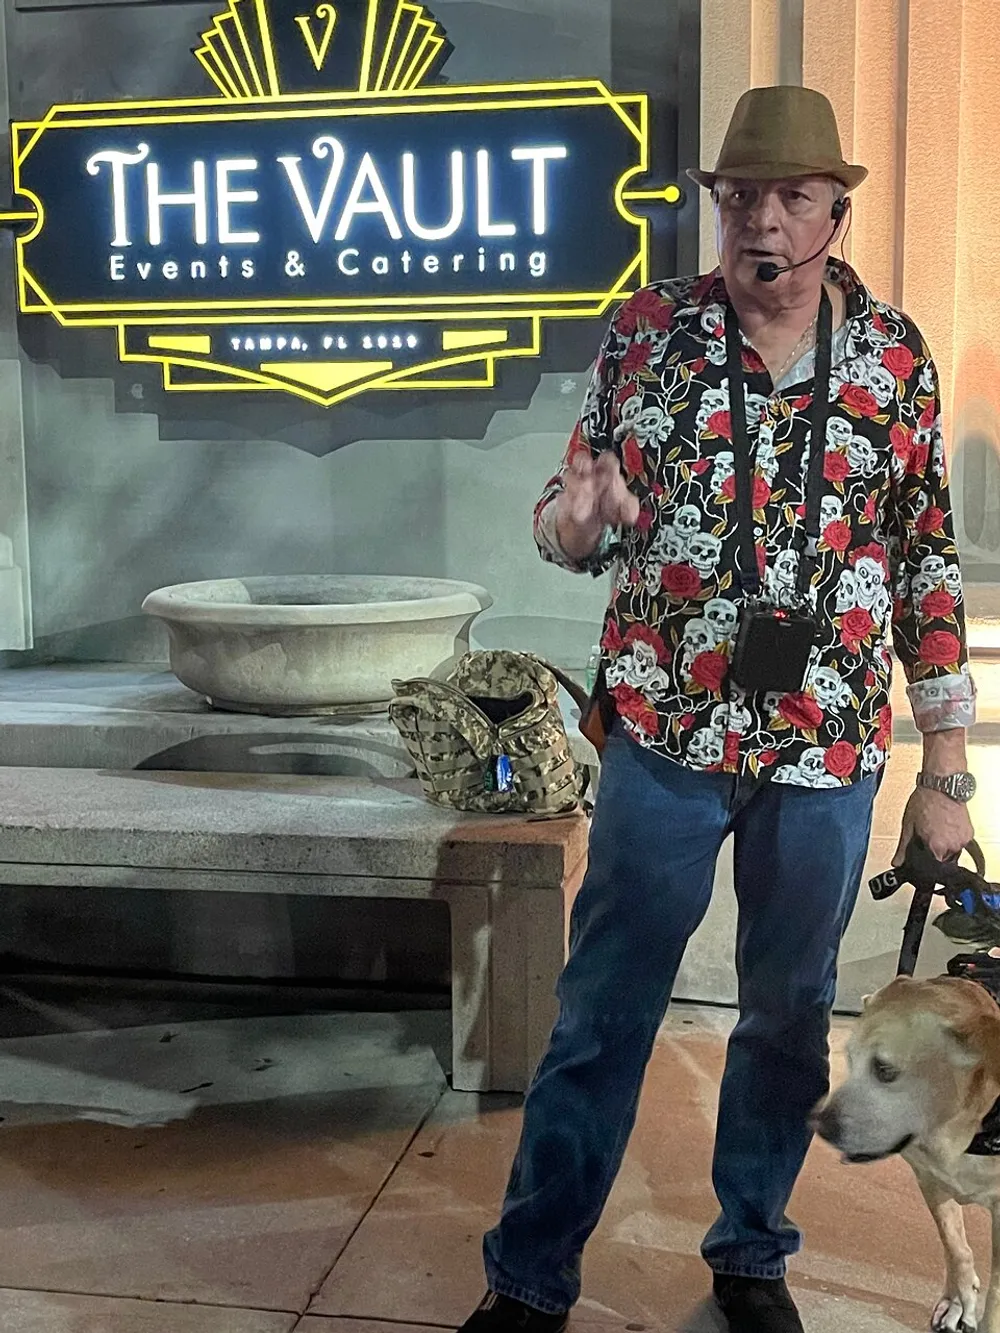 A person wearing a floral shirt and a hat is standing in front of a sign that reads THE VAULT Events  Catering with a dog walking by and a snake on a ledge to the left